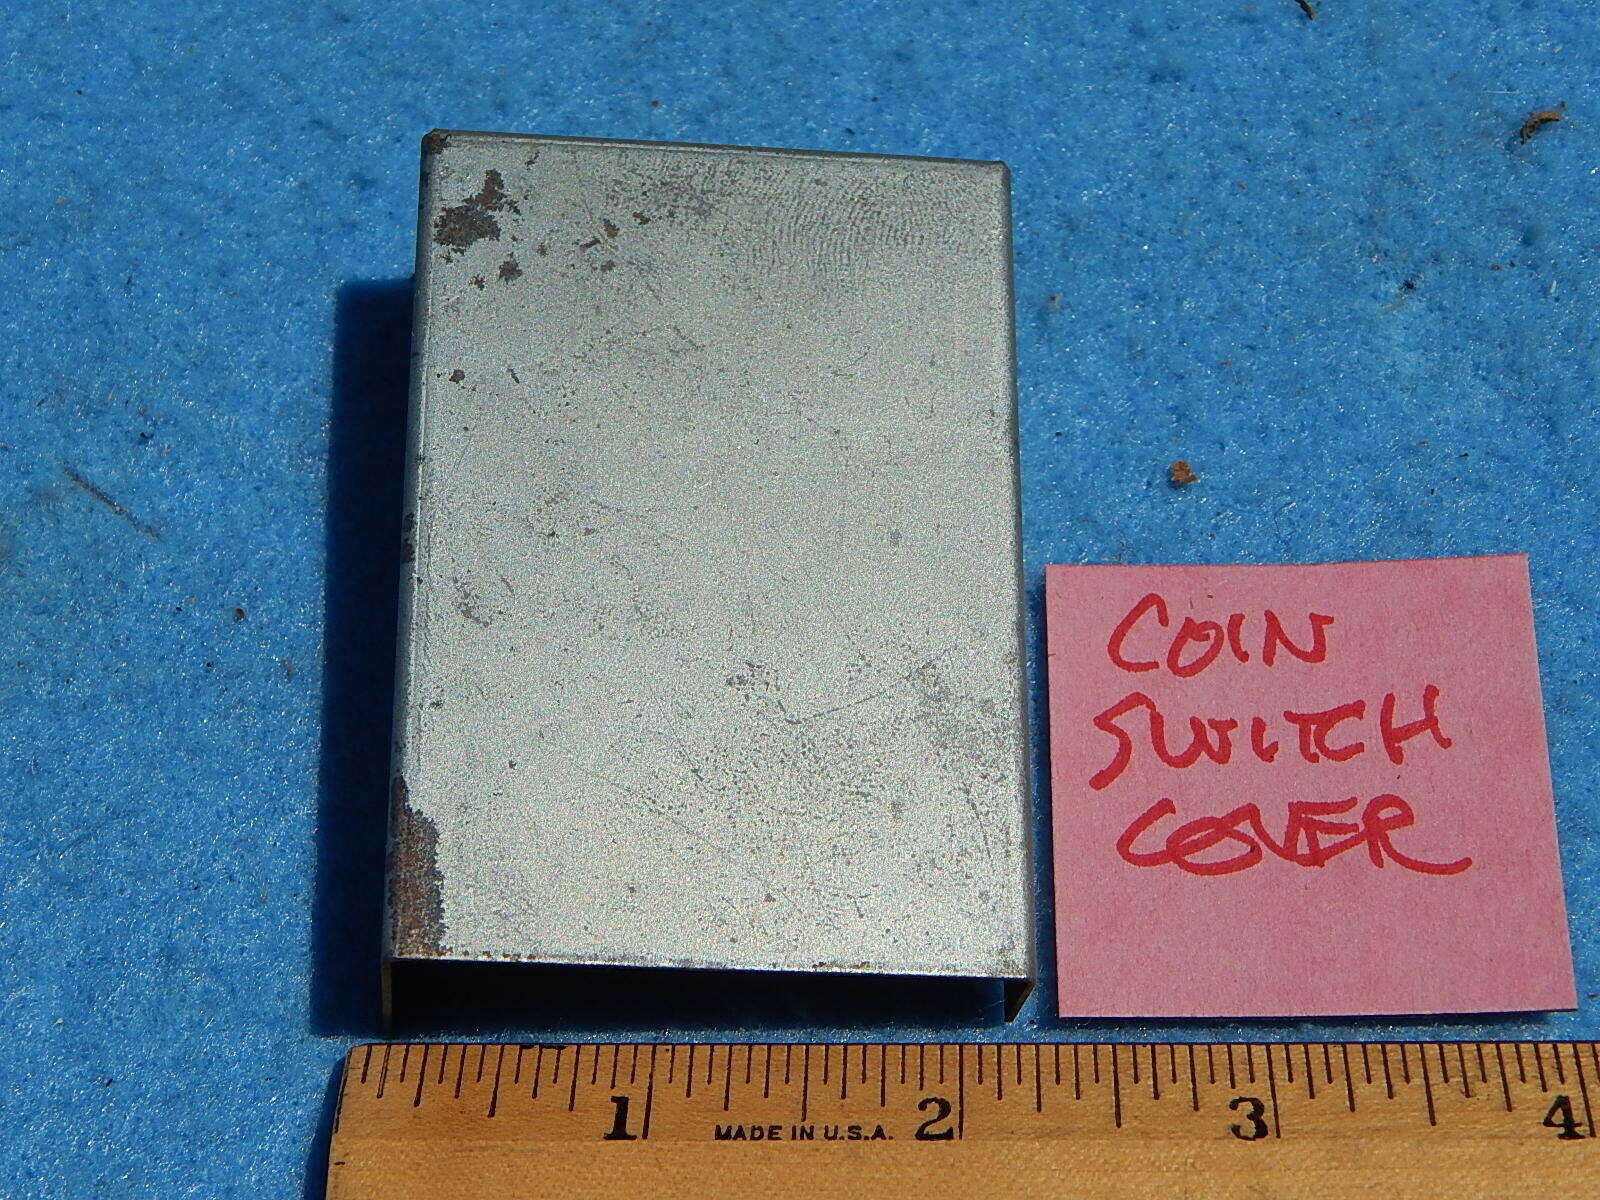 Rock-ola 1438 1442 1446 1448 1452 1454 Coin Switch Cover